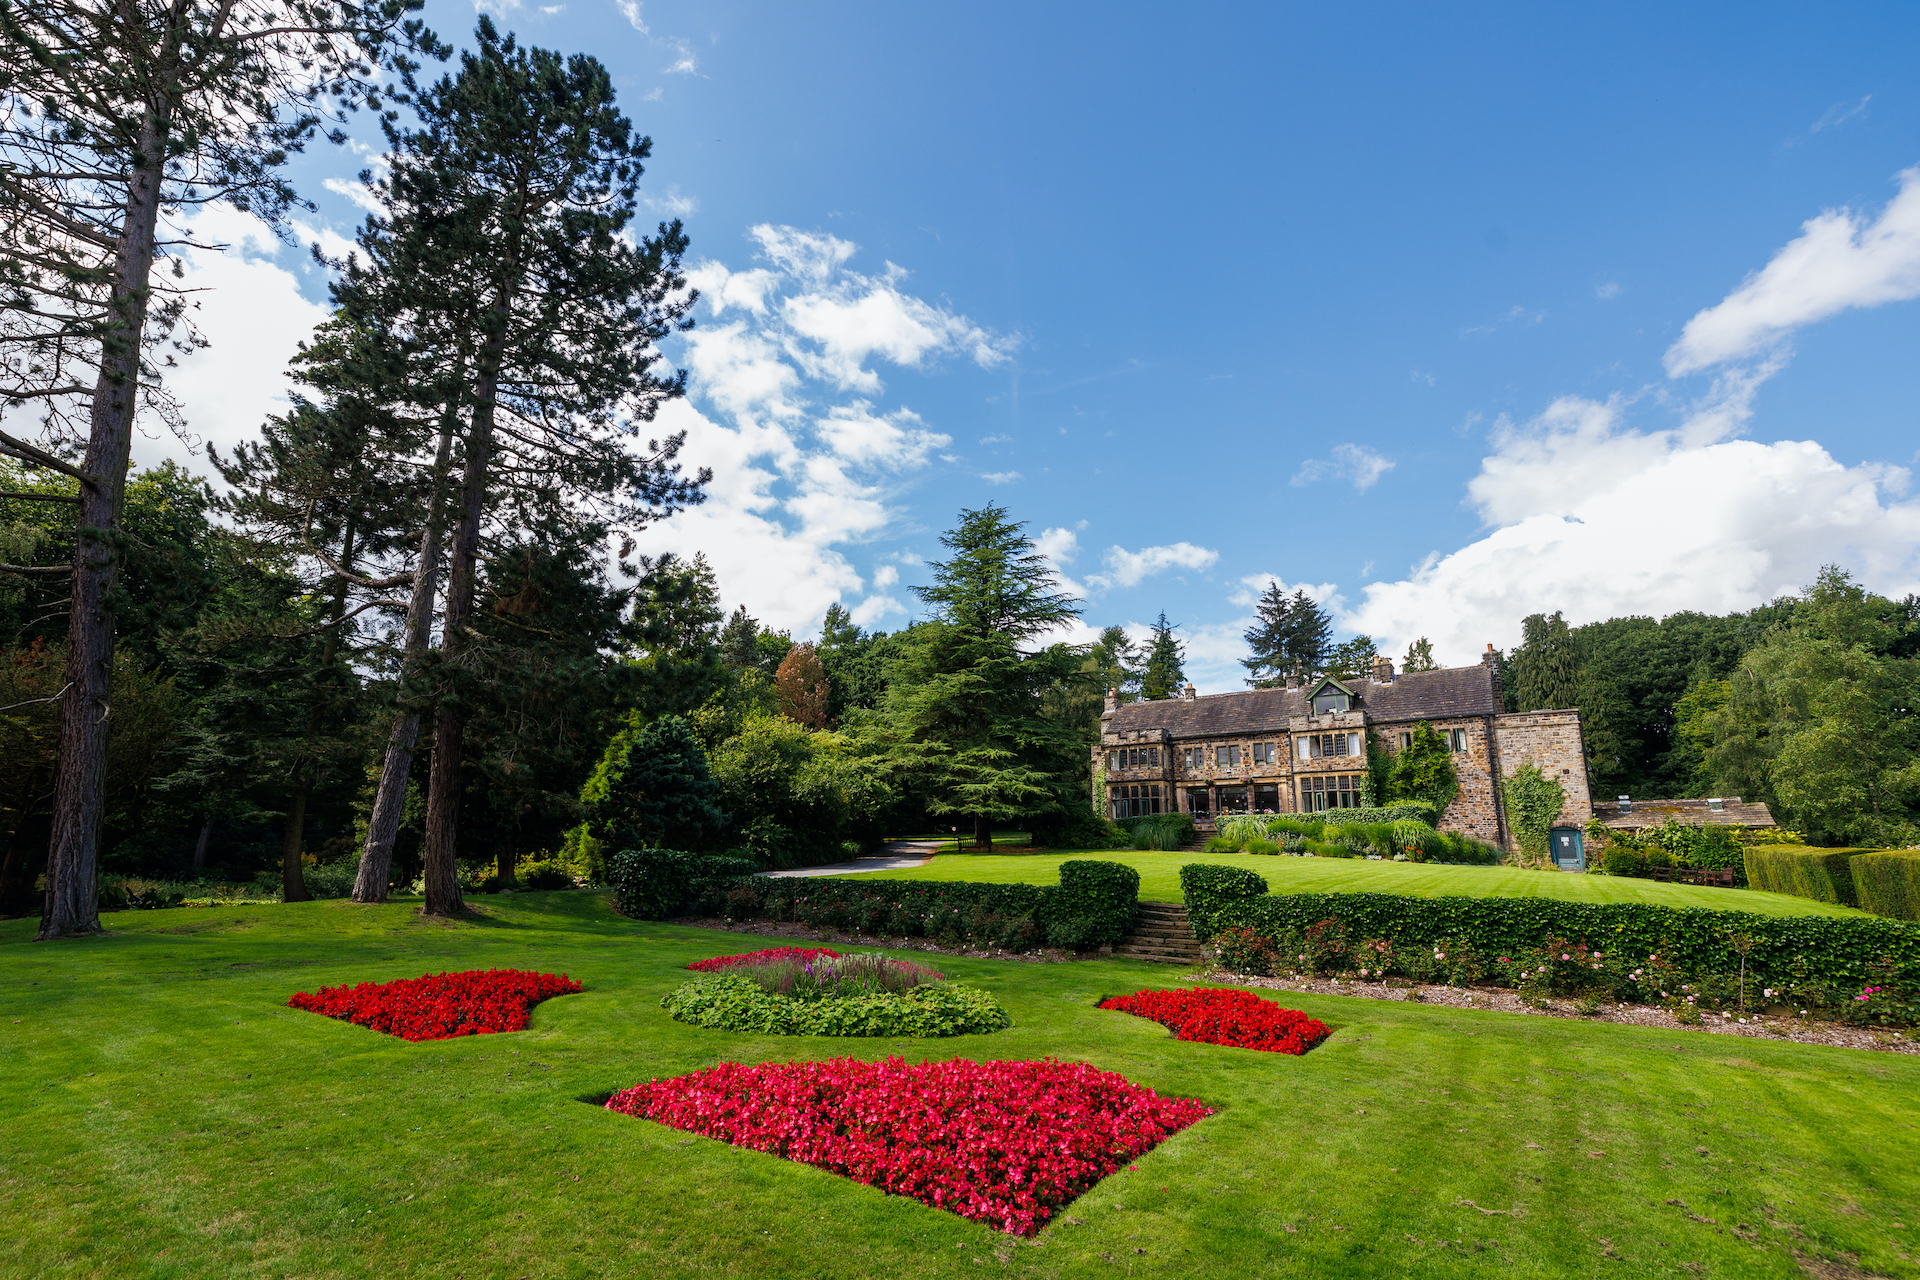 Introducing Whirlow Brook Hall: A Venue for Every Wedding Season